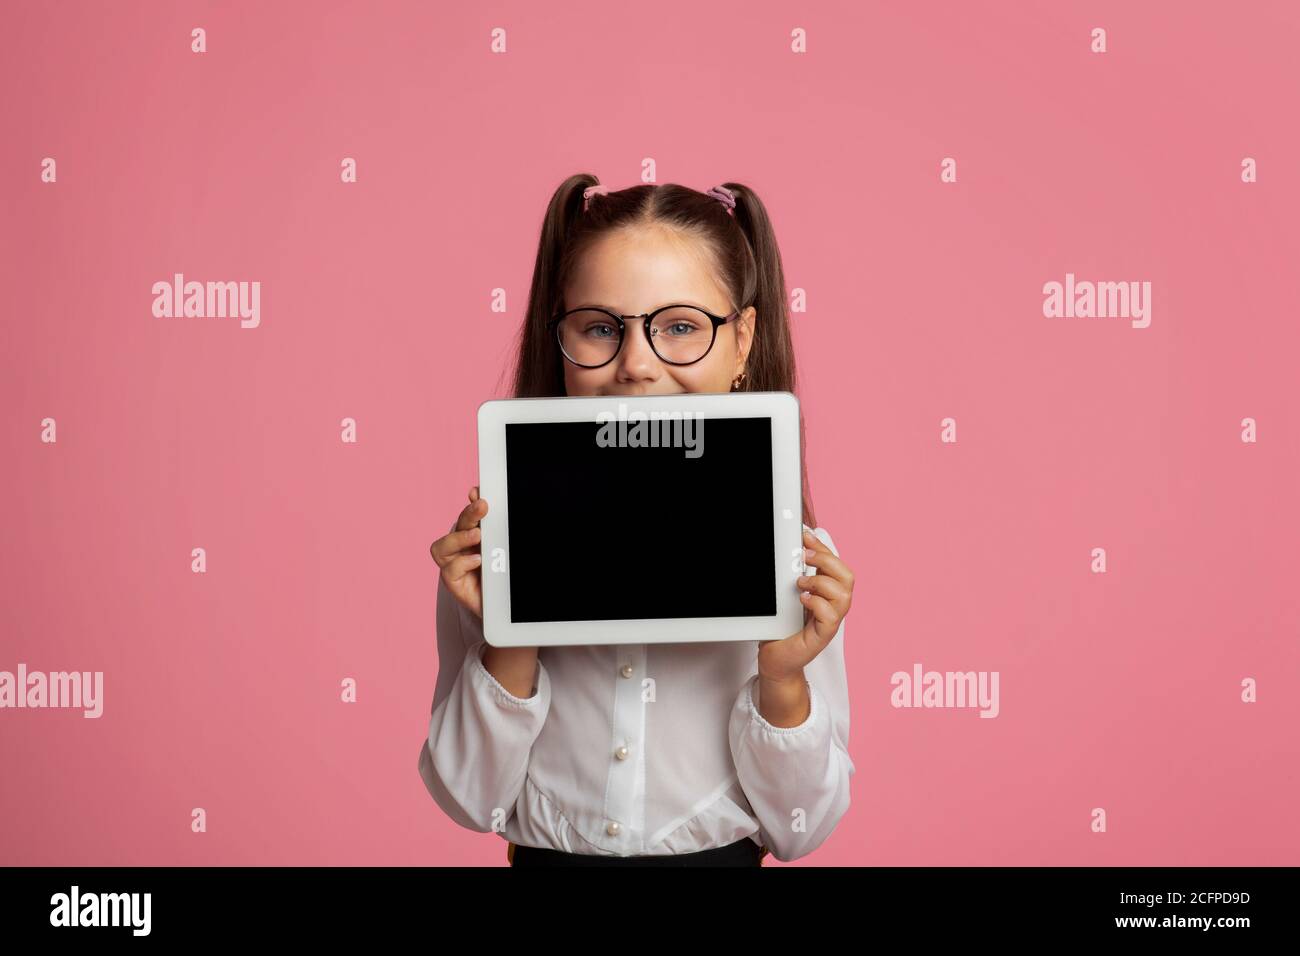 Education and distance learning for kids. Cheerful girl in glasses shows tablet with blank screen Stock Photo